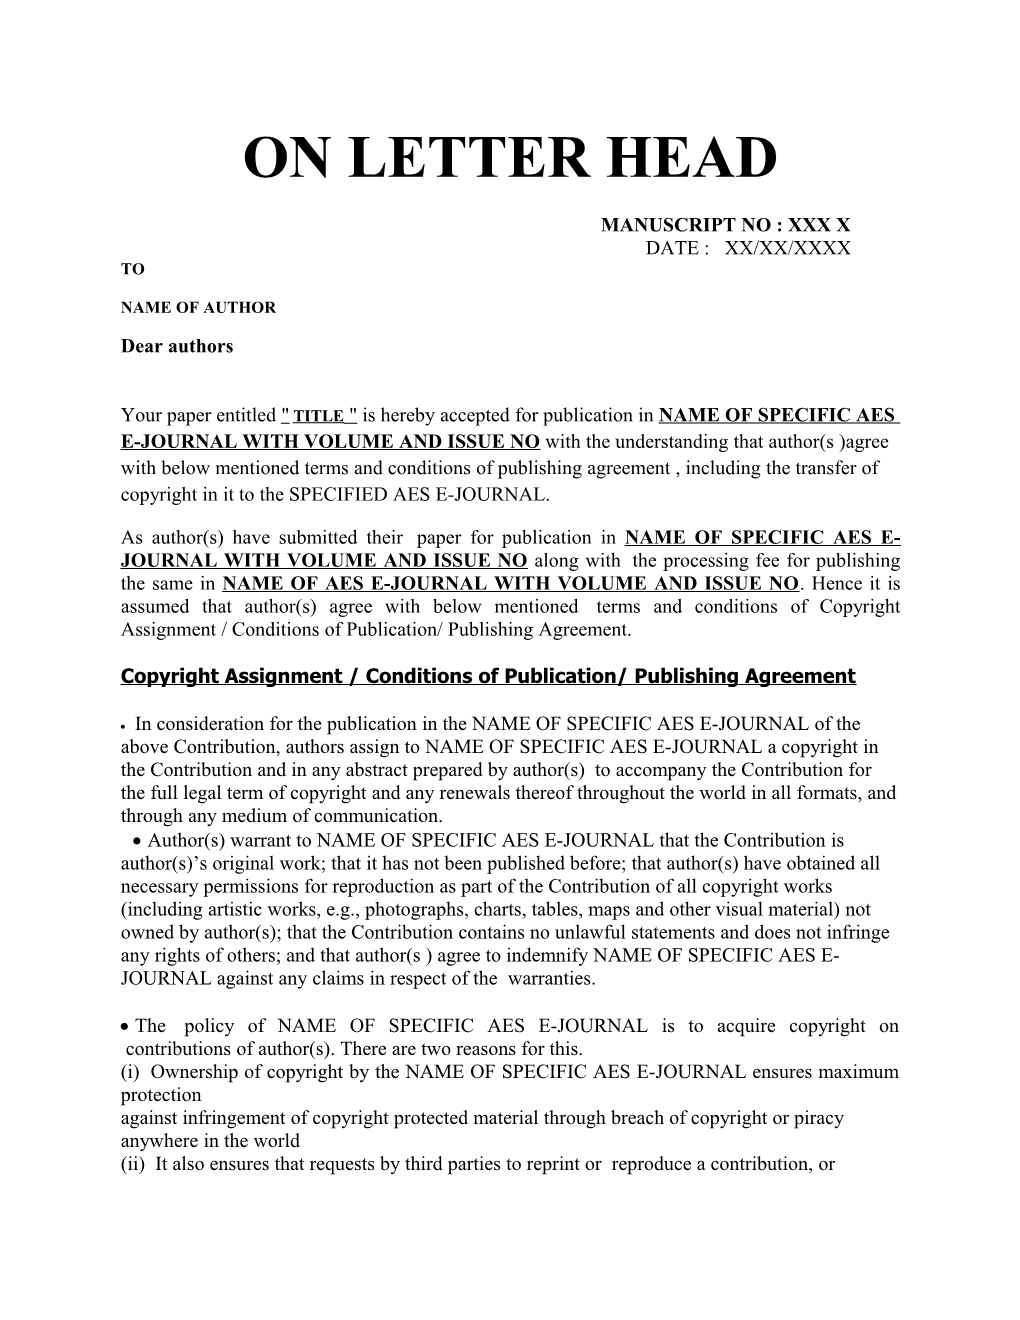 On Letter Head